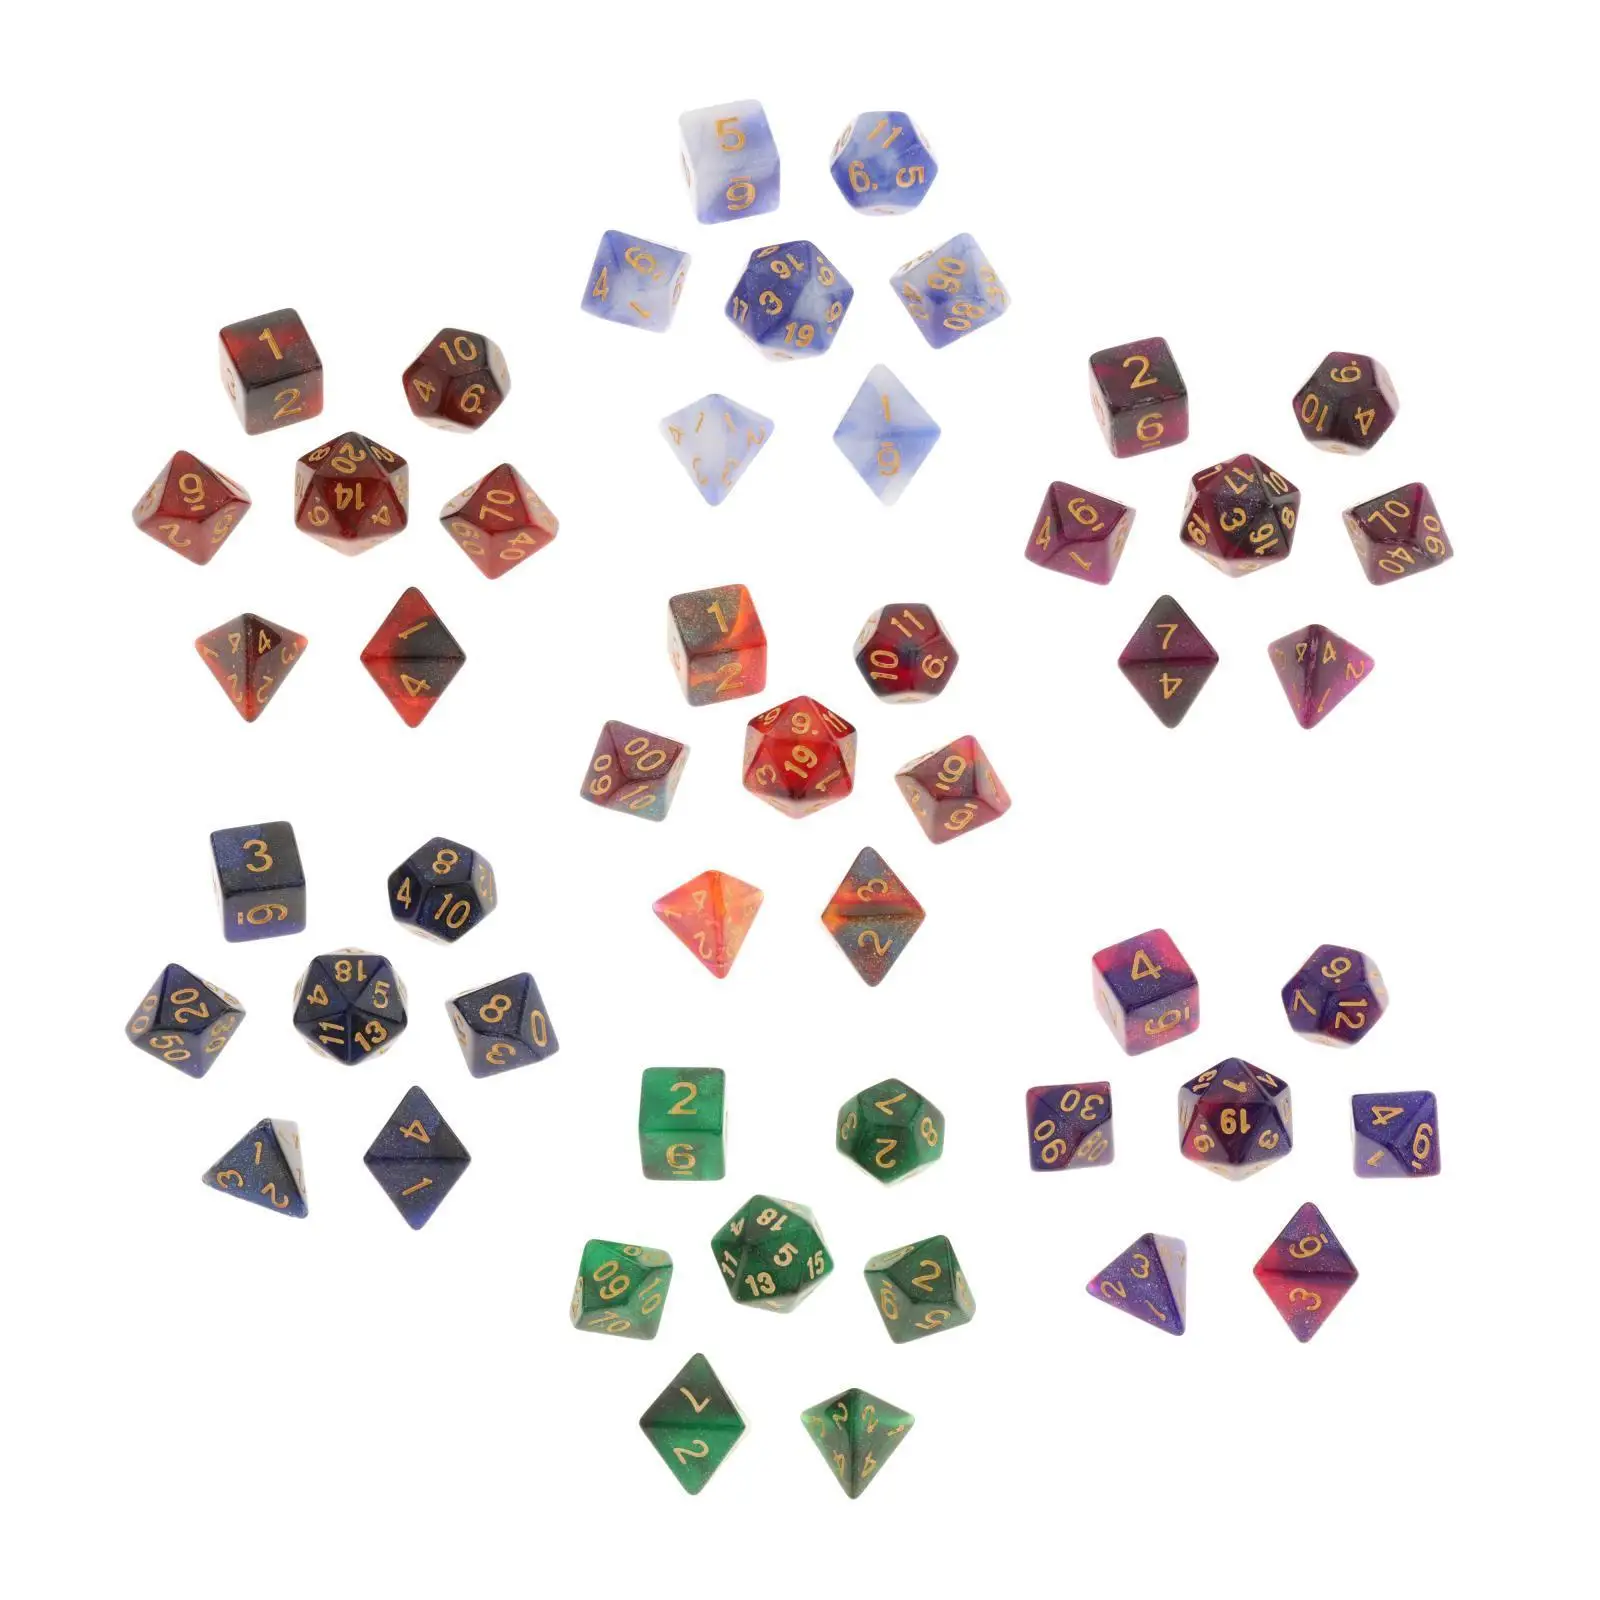 7x Multi-sided Digital Dice for MTG DND RPG Role Play Casino Board Game Toy